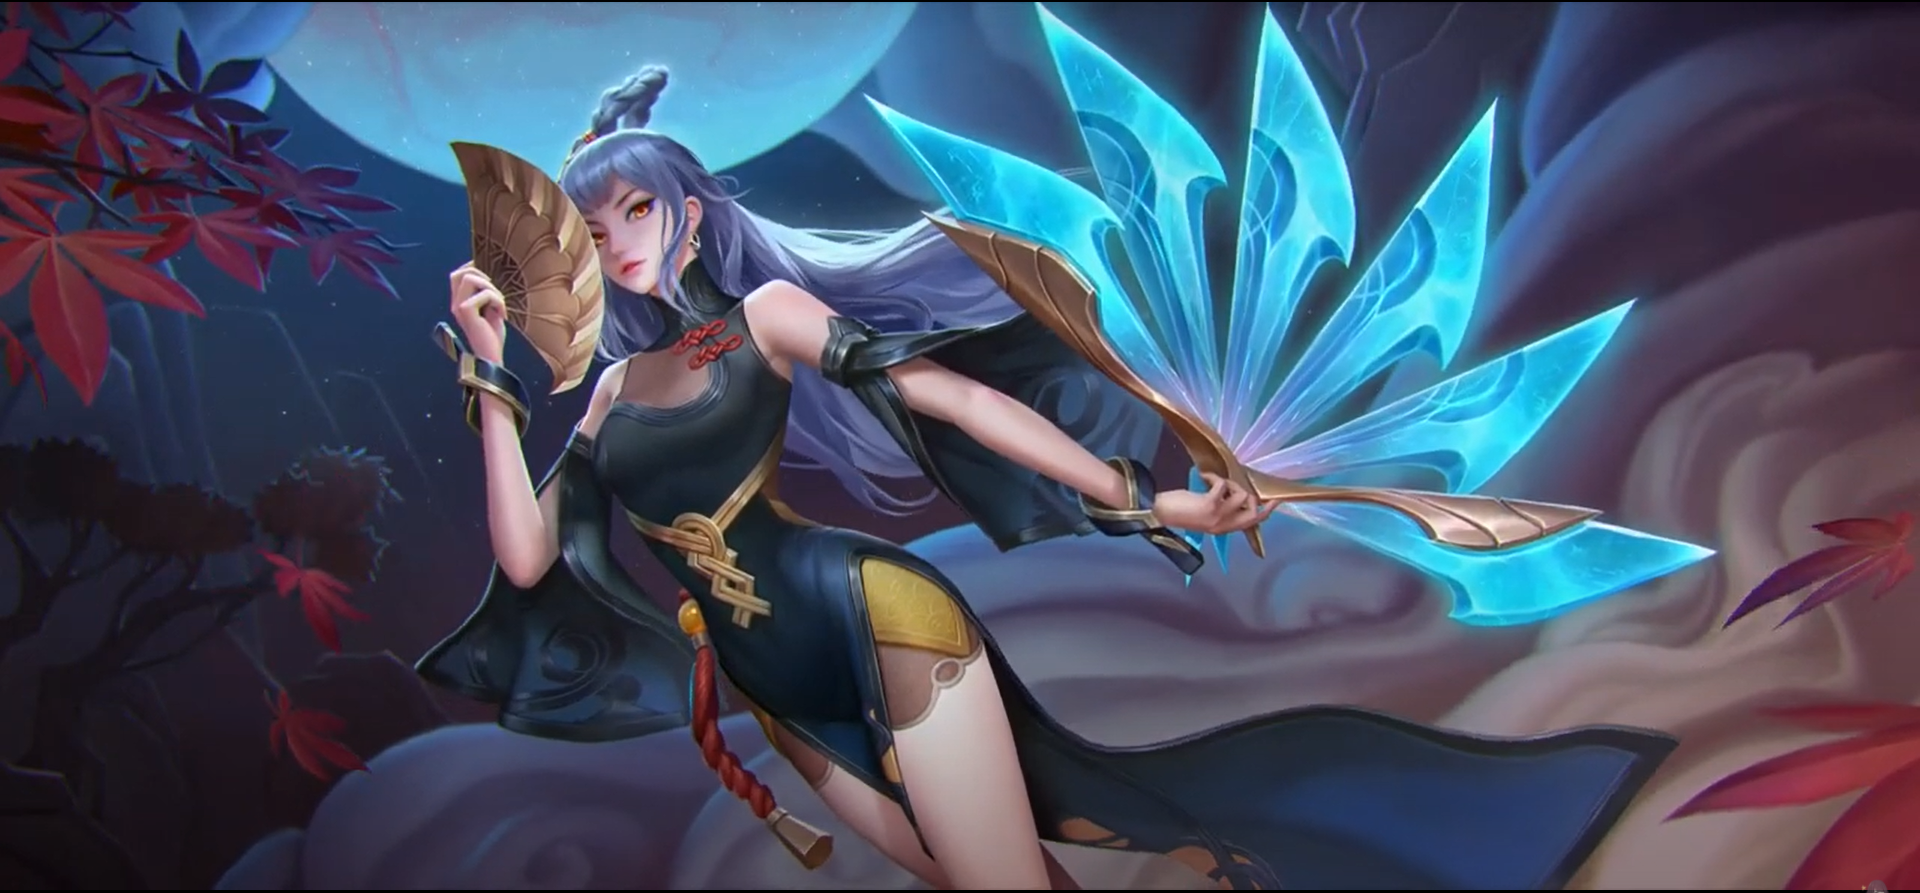 Arena of Valor on Twitter Lorion the Lord of the Dark Magic has finally  appeared ArenaofValor AOV Games MOBA Lorion NewHero  AoV4thAnniversary httpstcoQMHePzDmOy  Twitter